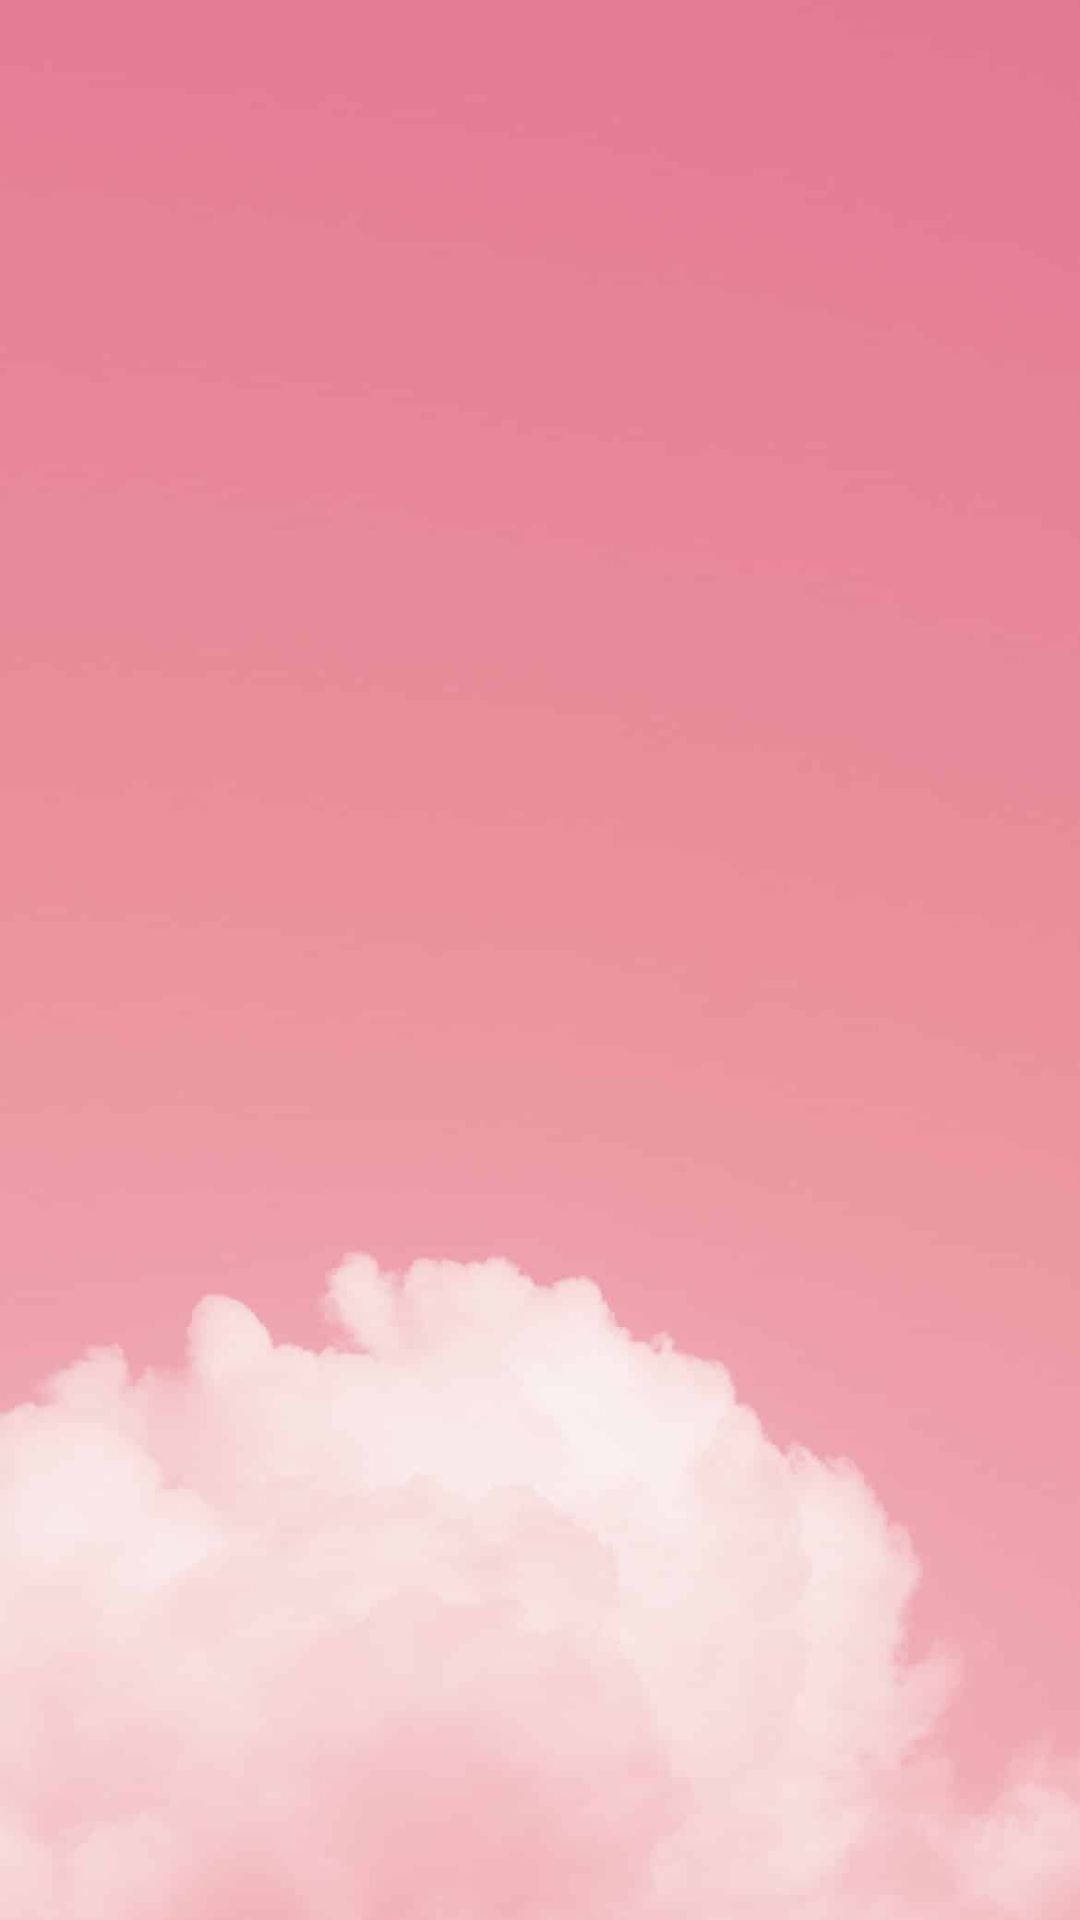 Aesthetic Pink Sky With A Cloud Picture